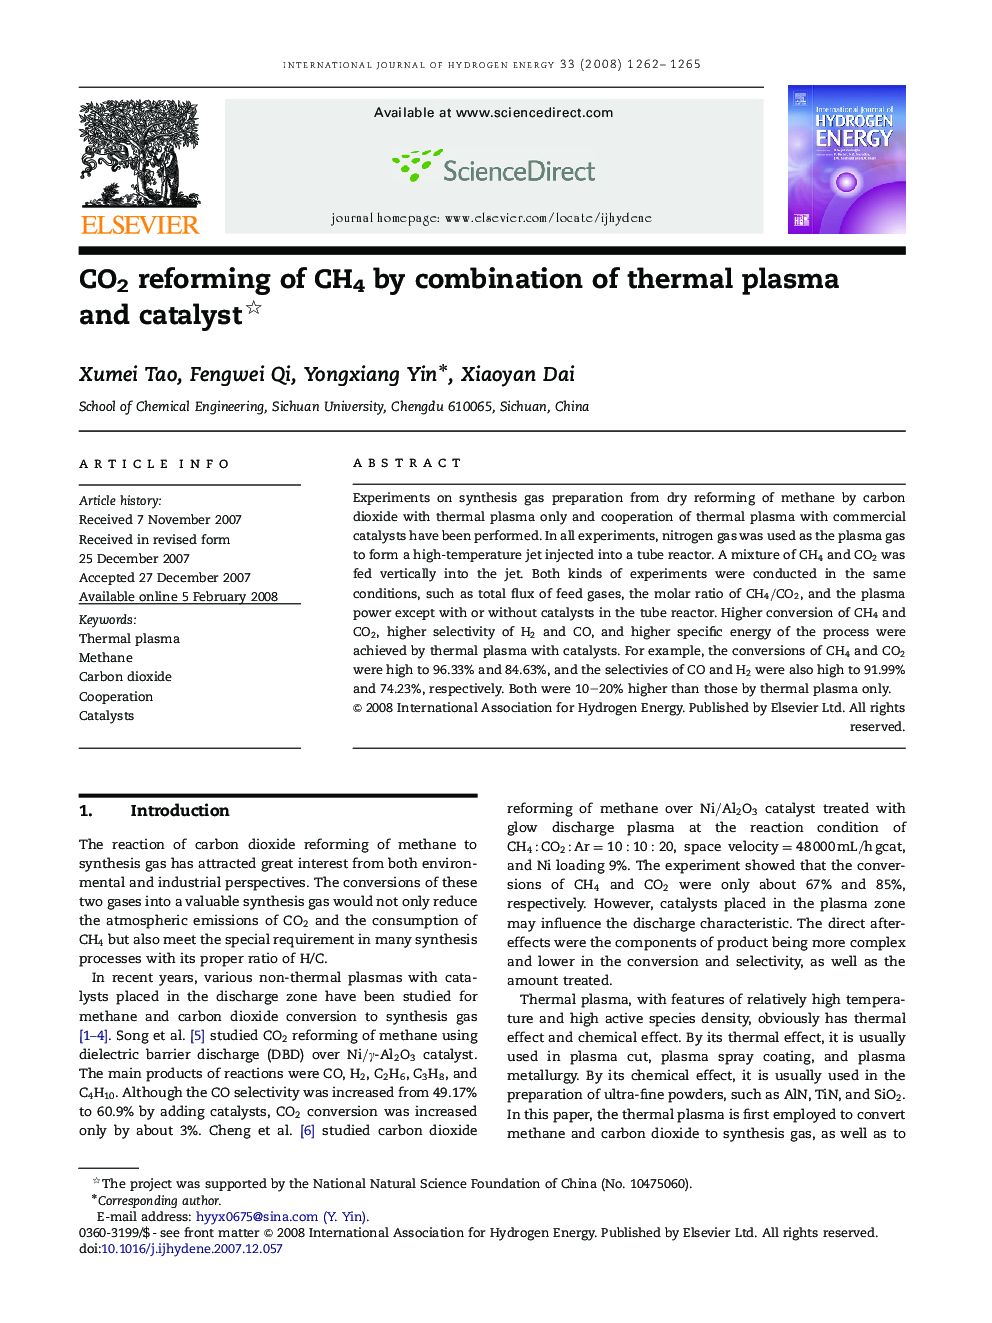 CO2 reforming of CH4 by combination of thermal plasma and catalyst 